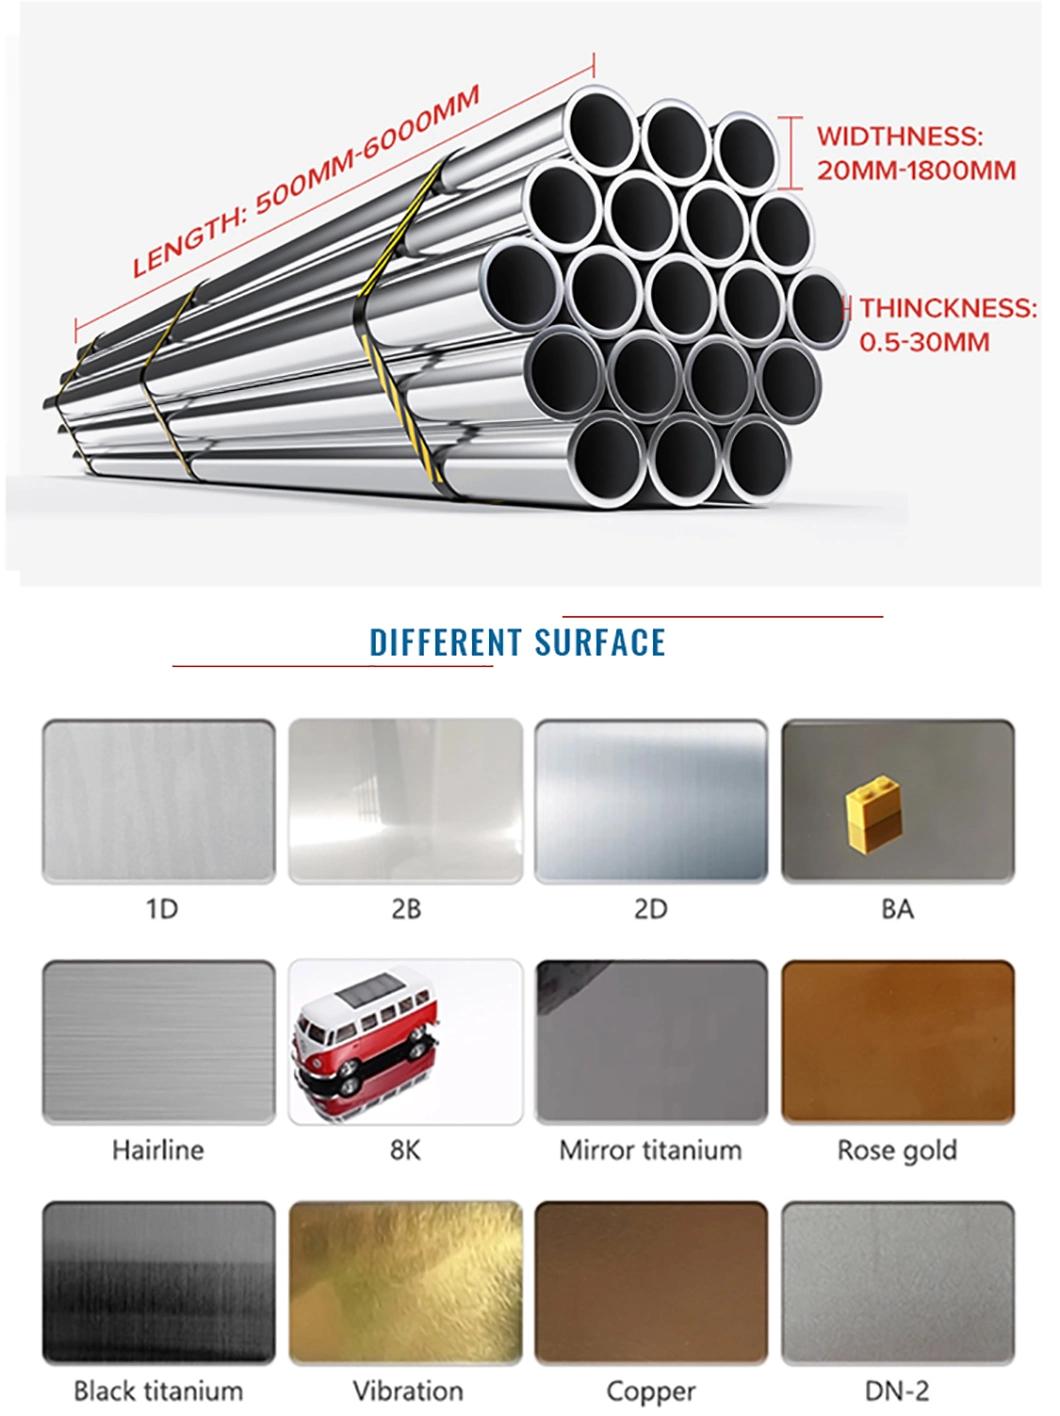 ASTM 304 316 Welded Stainless Square Steel Pipe